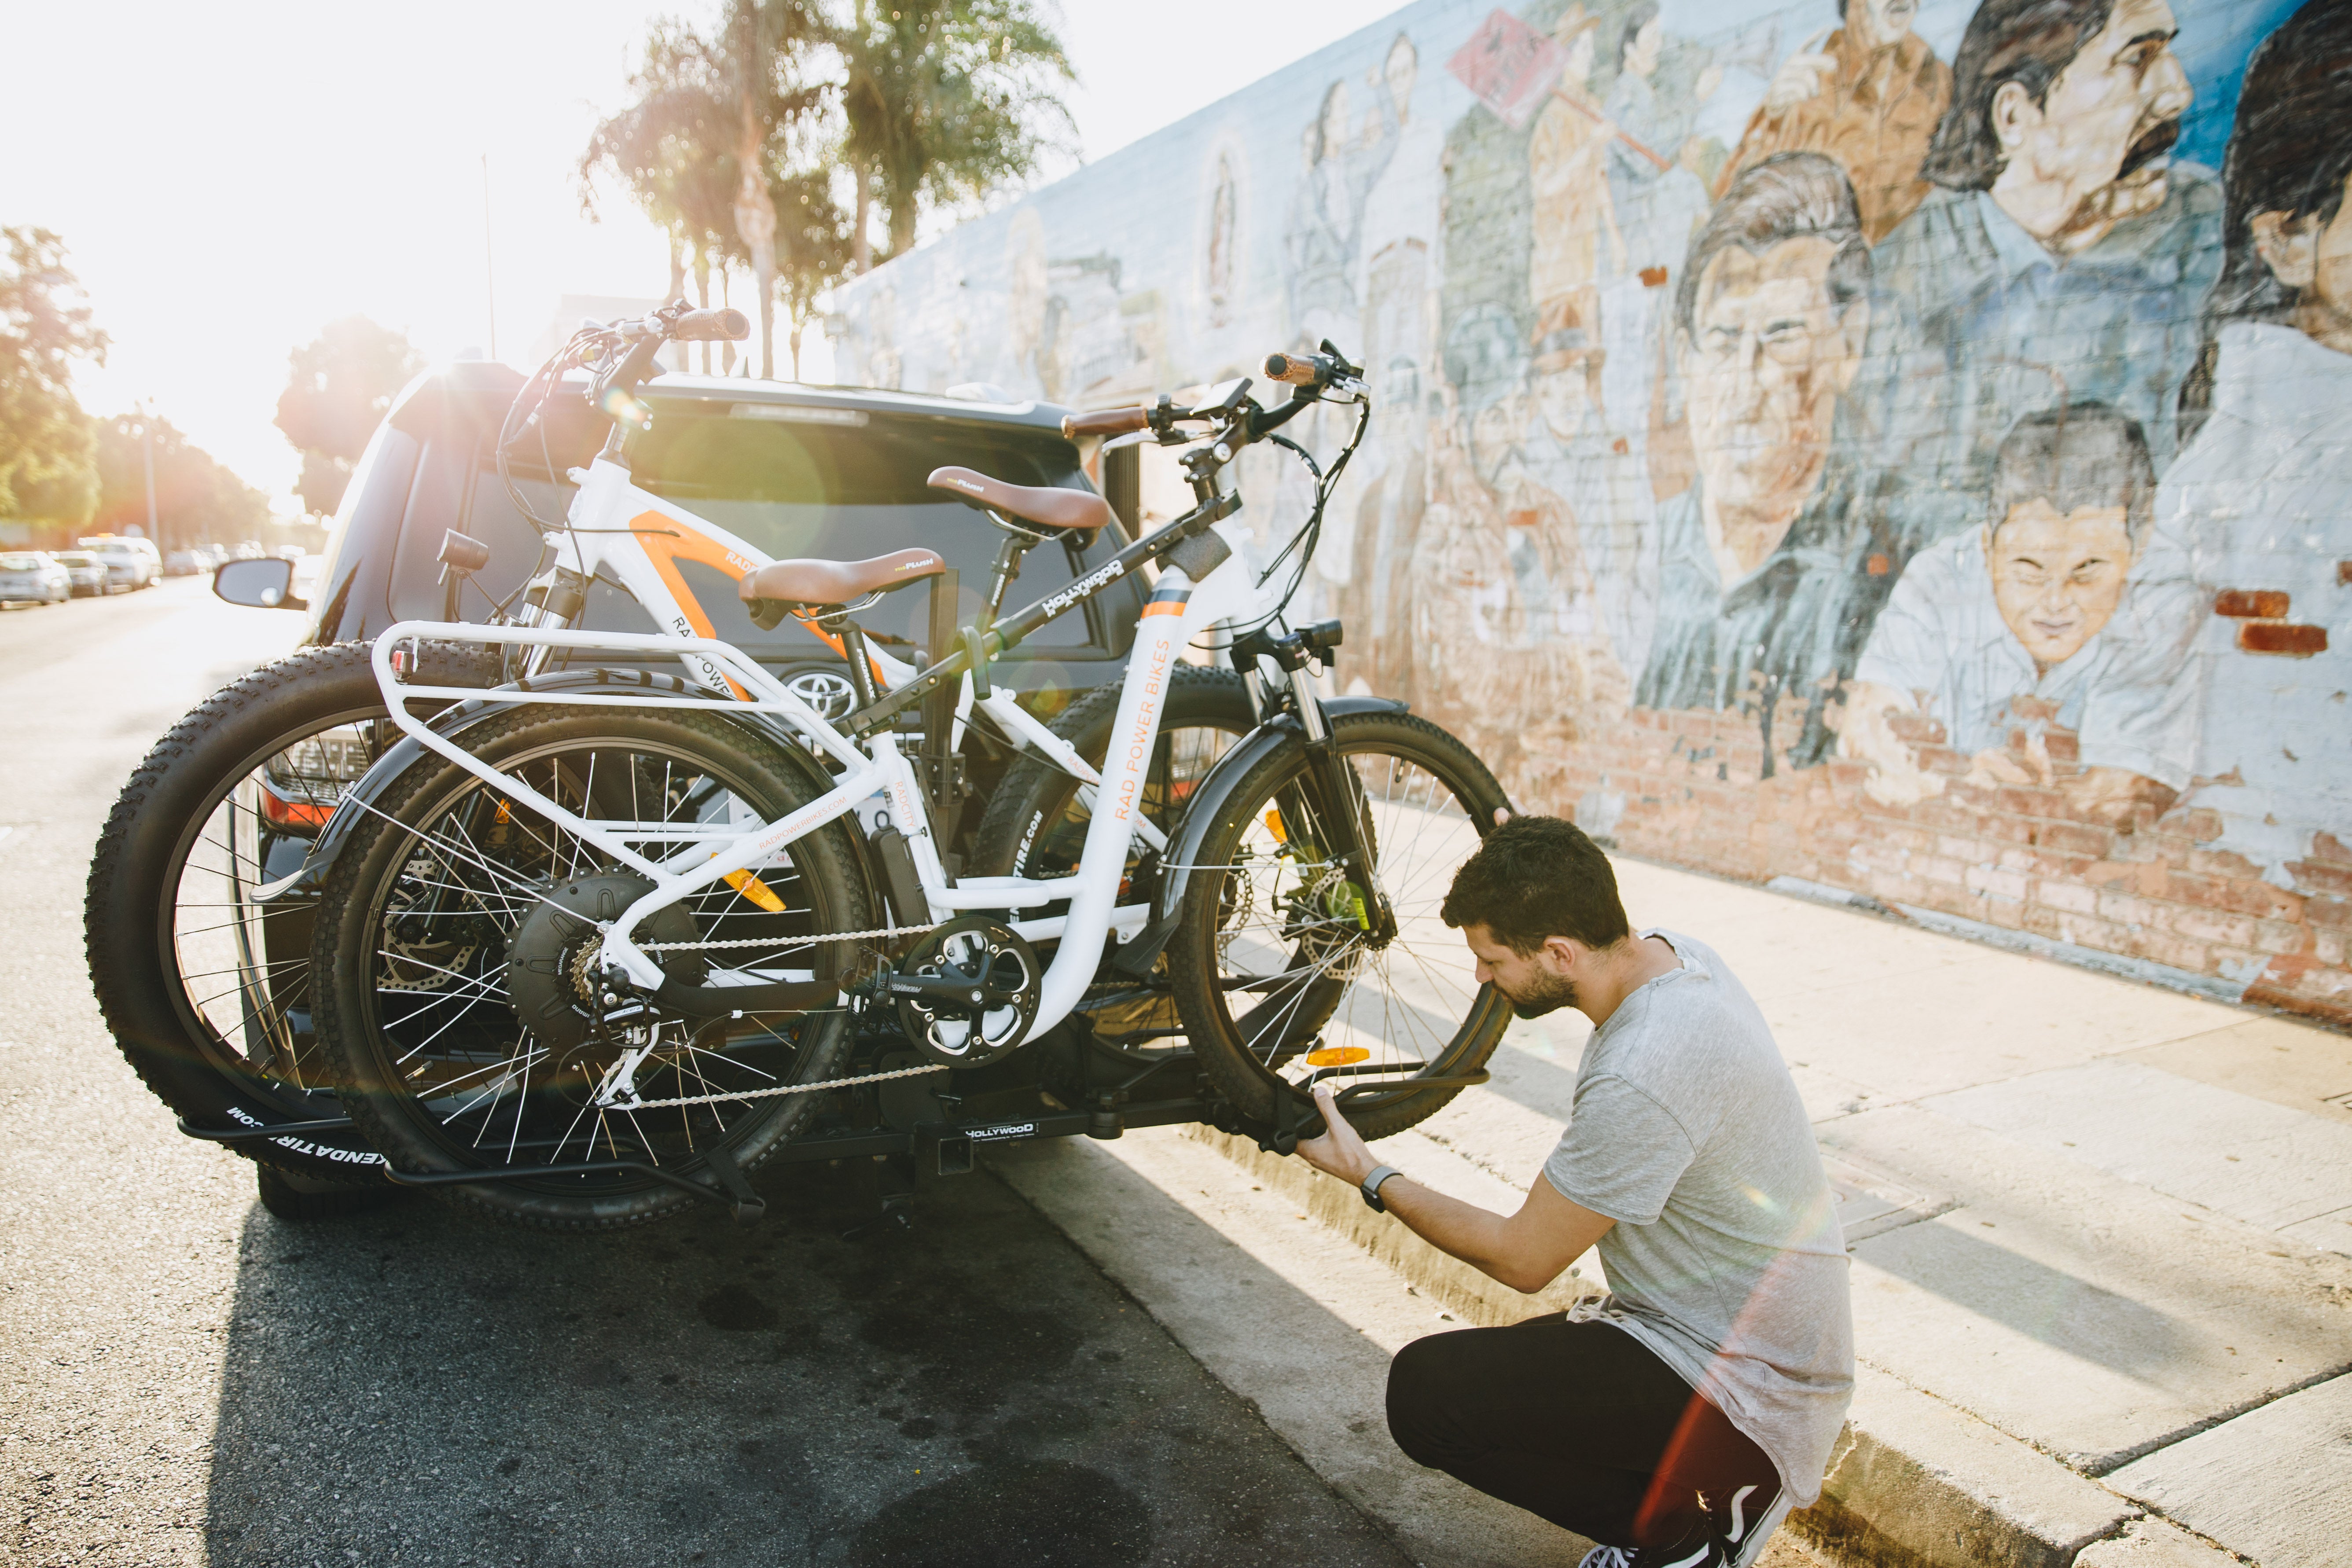 How to Get Your Bike Summer Ready